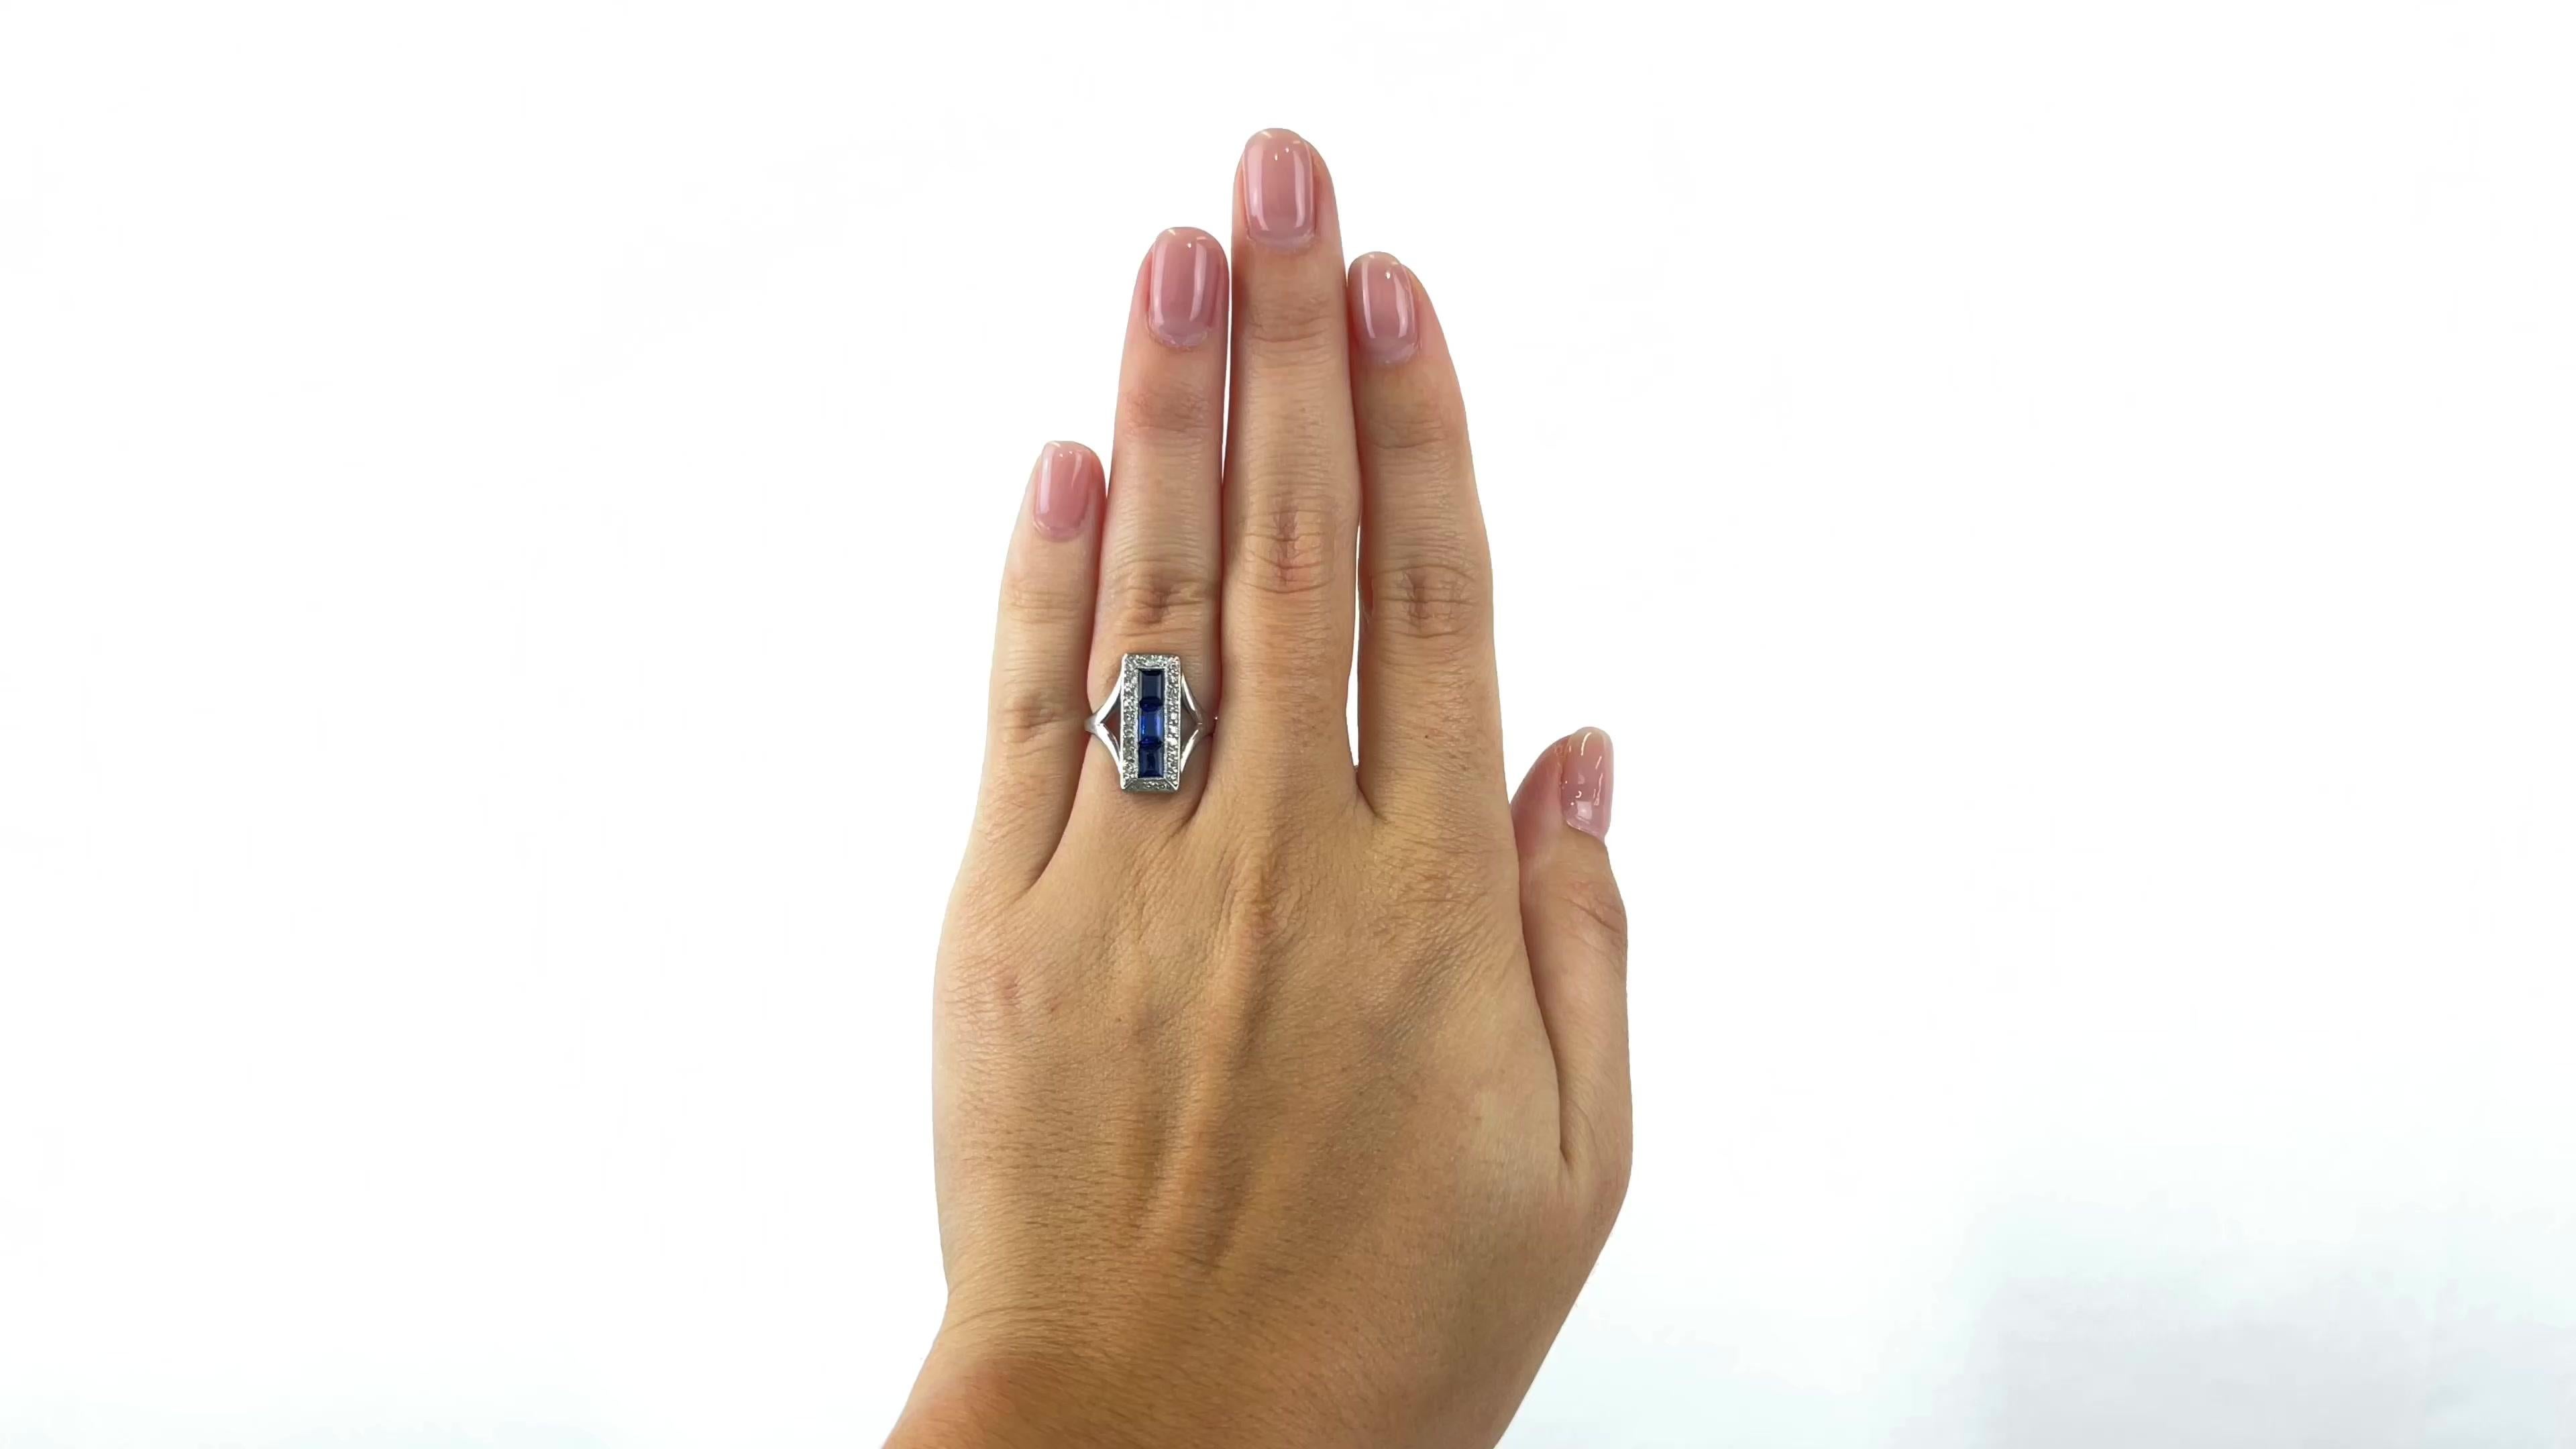 One Art Deco Sapphire Diamond Platinum Ring. Featuring three square cut sapphires with a total weight of approximately 0.81 carats. Accented by 26 single cut diamonds with a total weight of approximately 0.26 carats, graded G color, SI clarity.